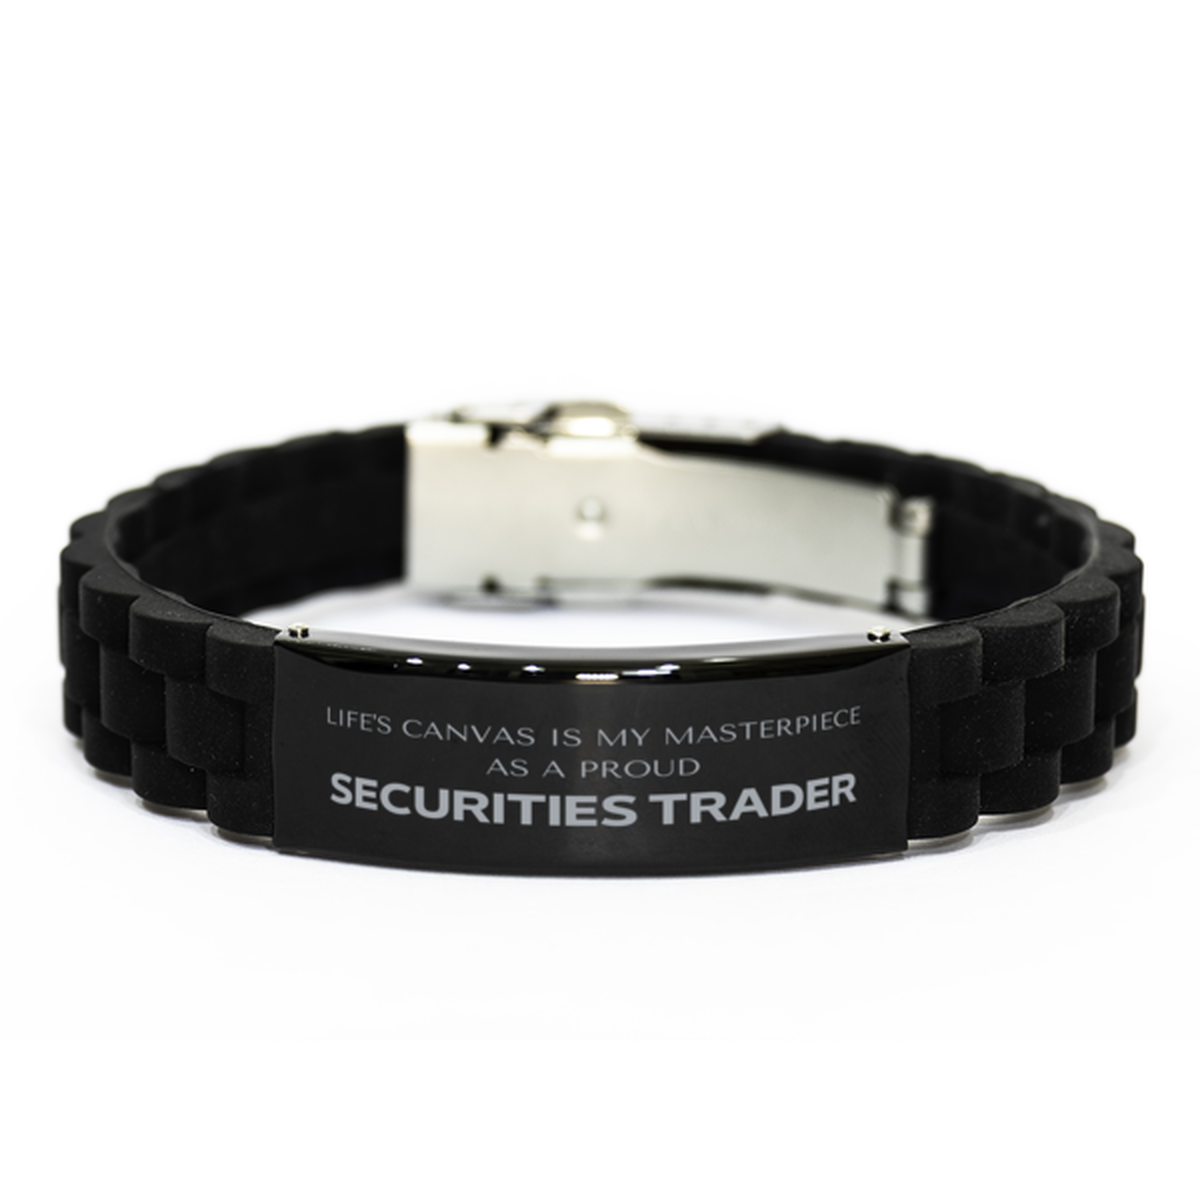 Proud Securities Trader Gifts, Life's canvas is my masterpiece, Epic Birthday Christmas Unique Black Glidelock Clasp Bracelet For Securities Trader, Coworkers, Men, Women, Friends